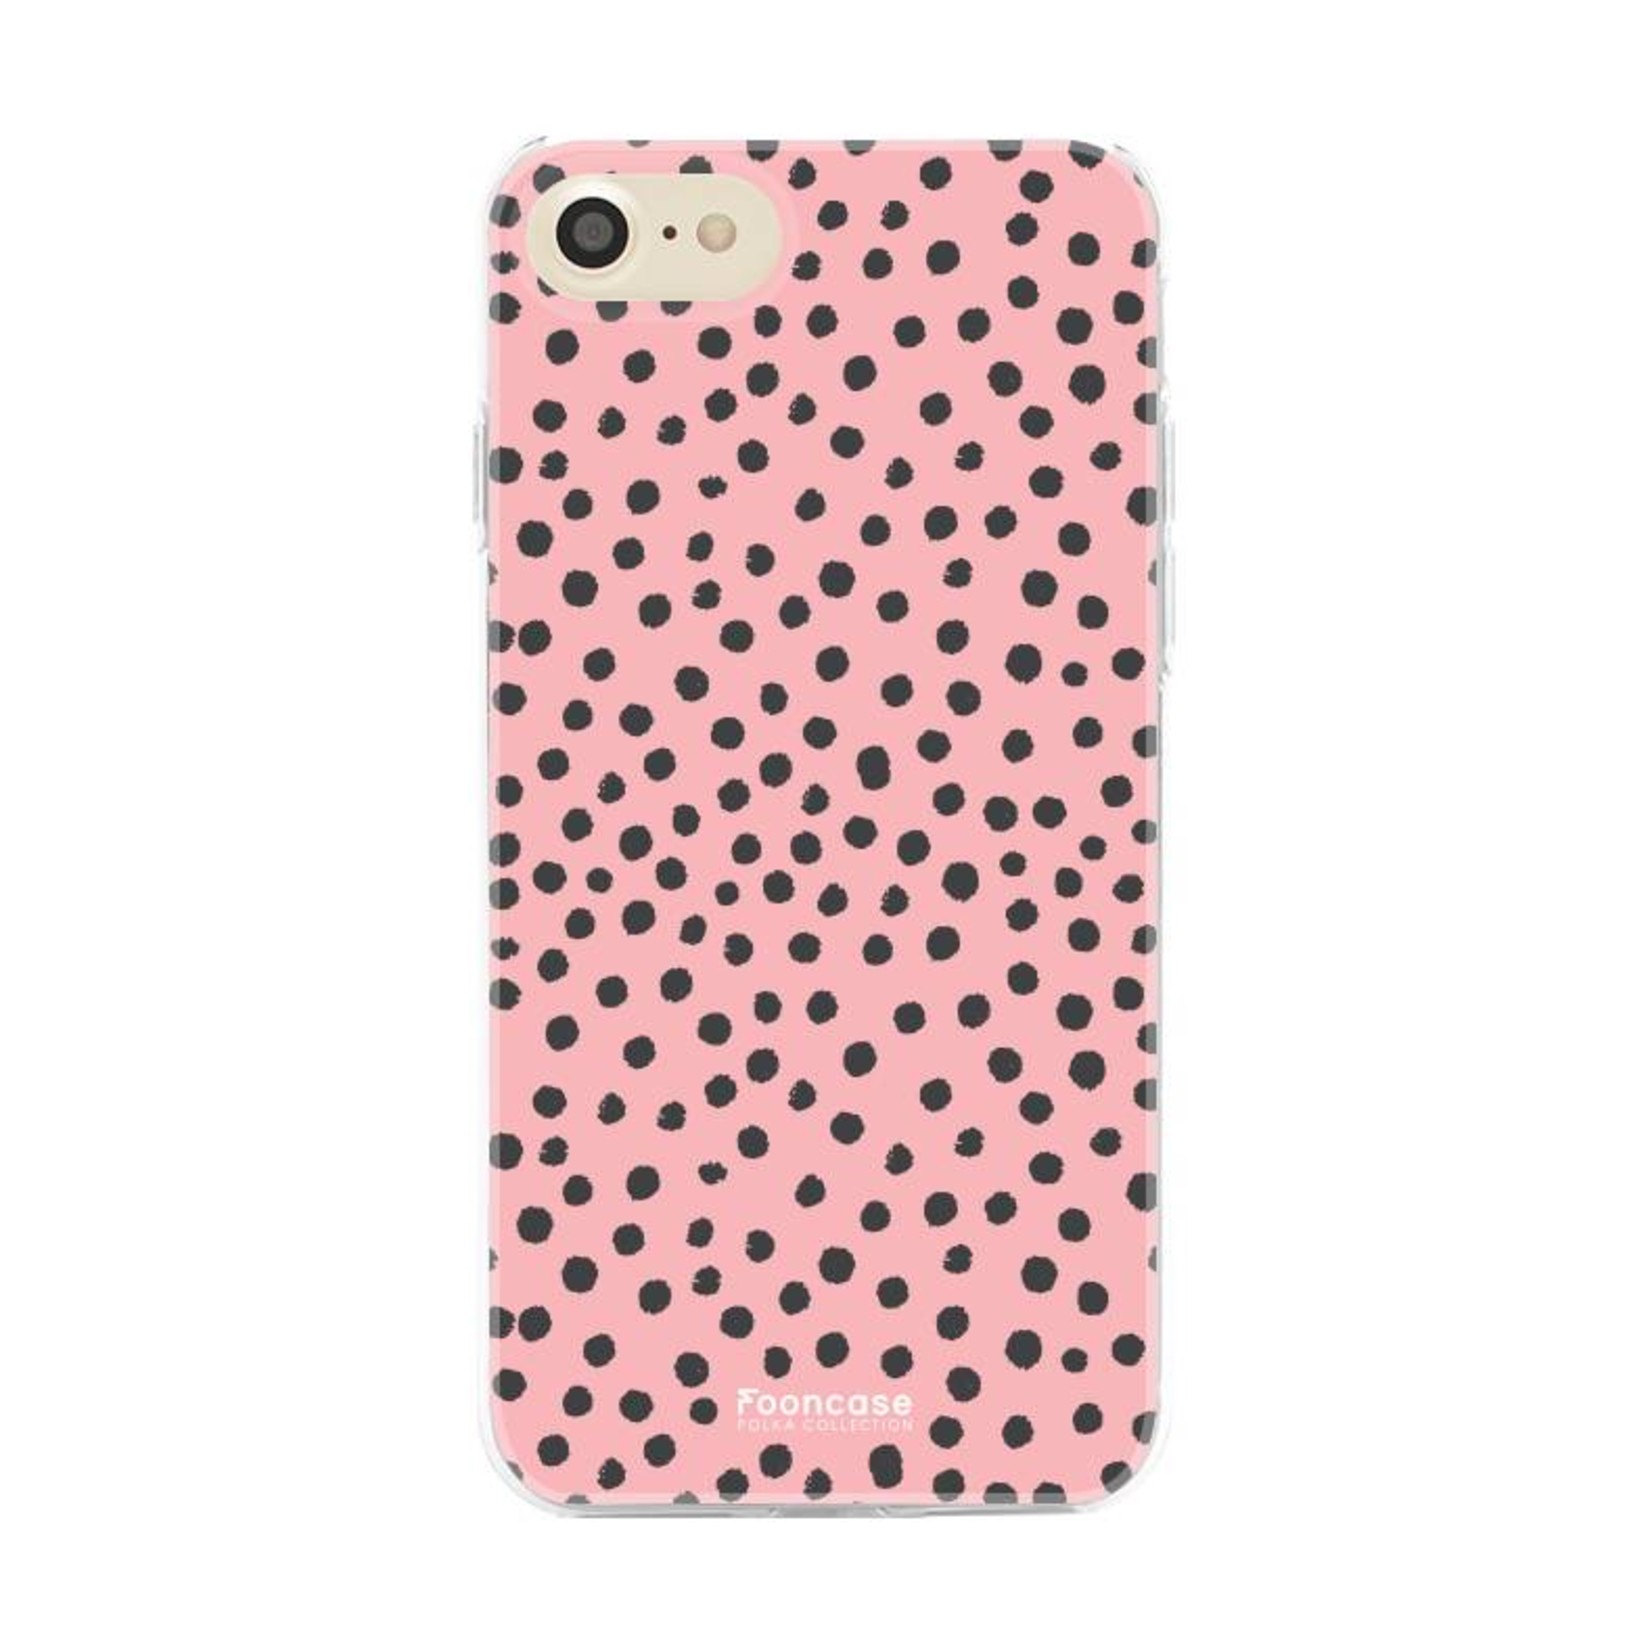 FOONCASE iPhone SE (2020) Case - POLKA COLLECTION / Pink